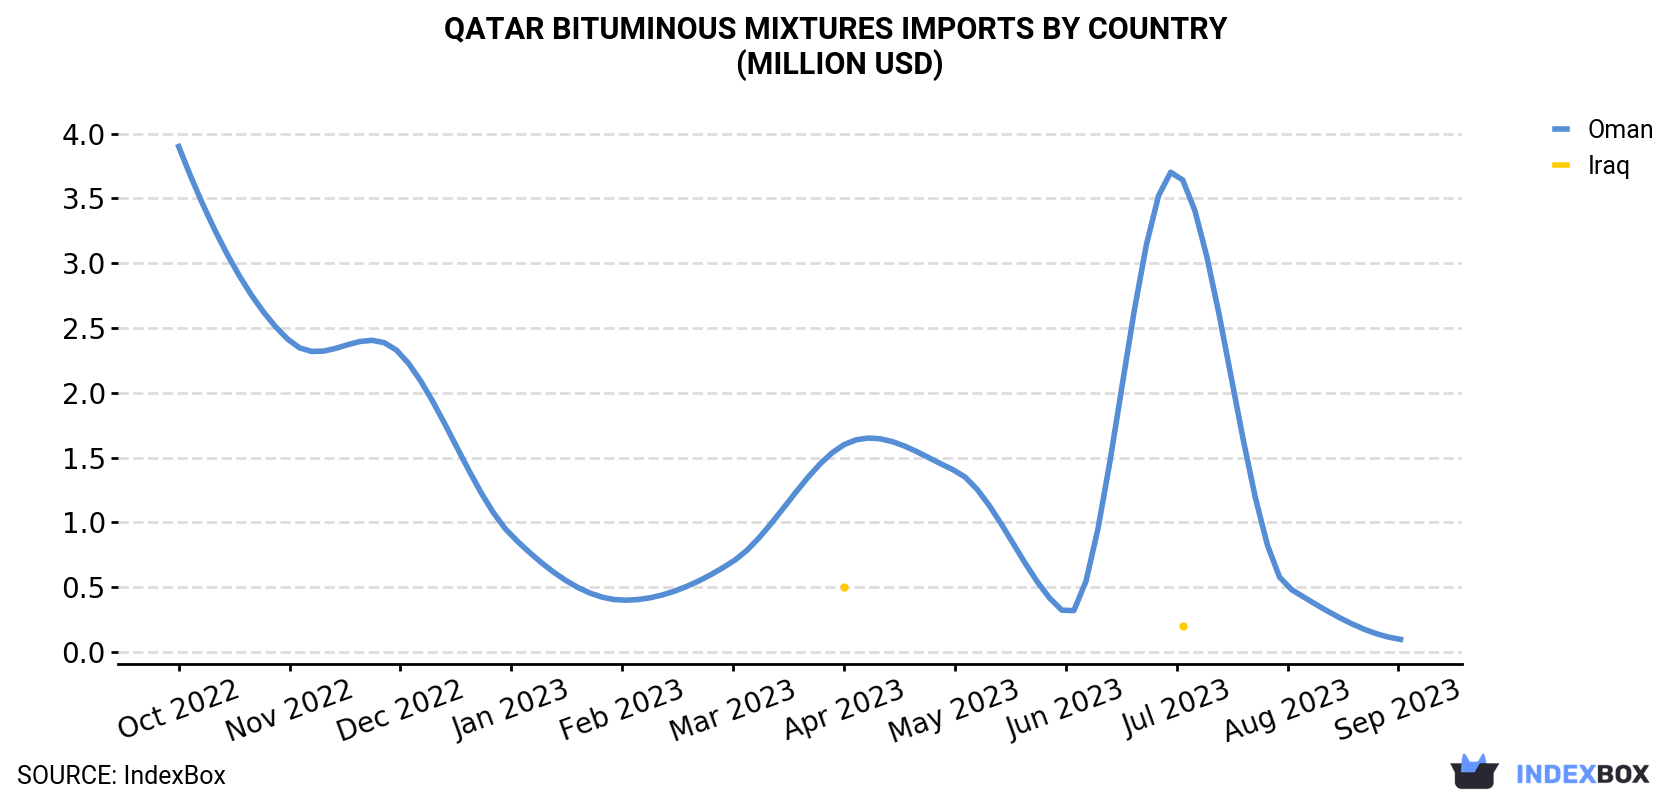 Qatar Bituminous Mixtures Imports By Country (Million USD)